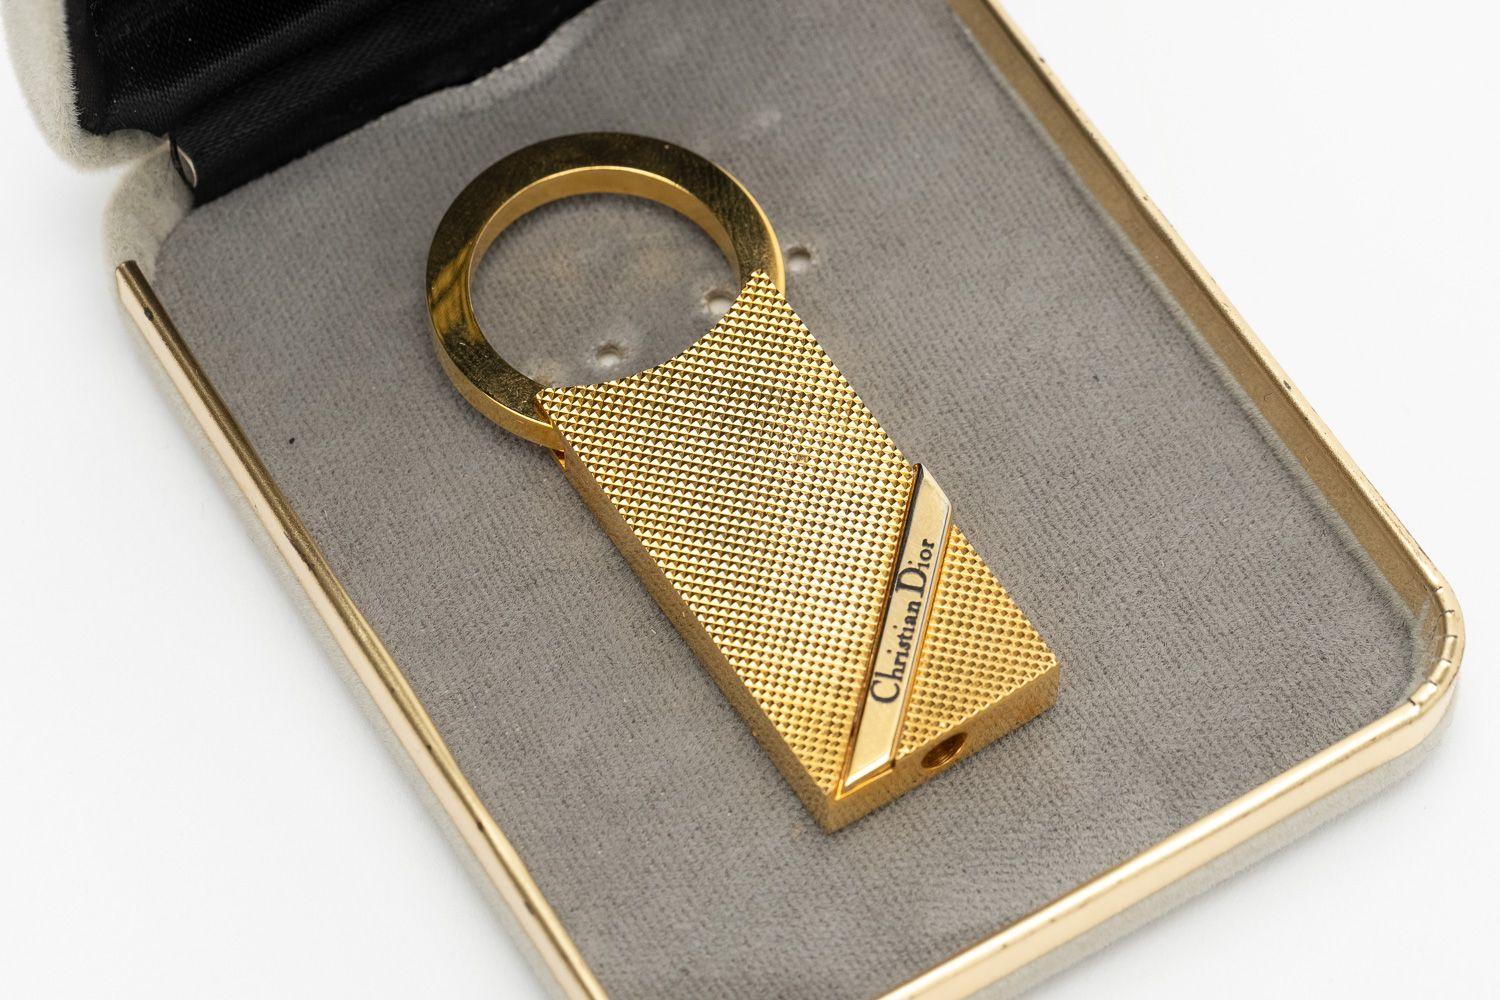 Dior vintage gold plated keychain in very good condition. Rare find.
Comes with original box.